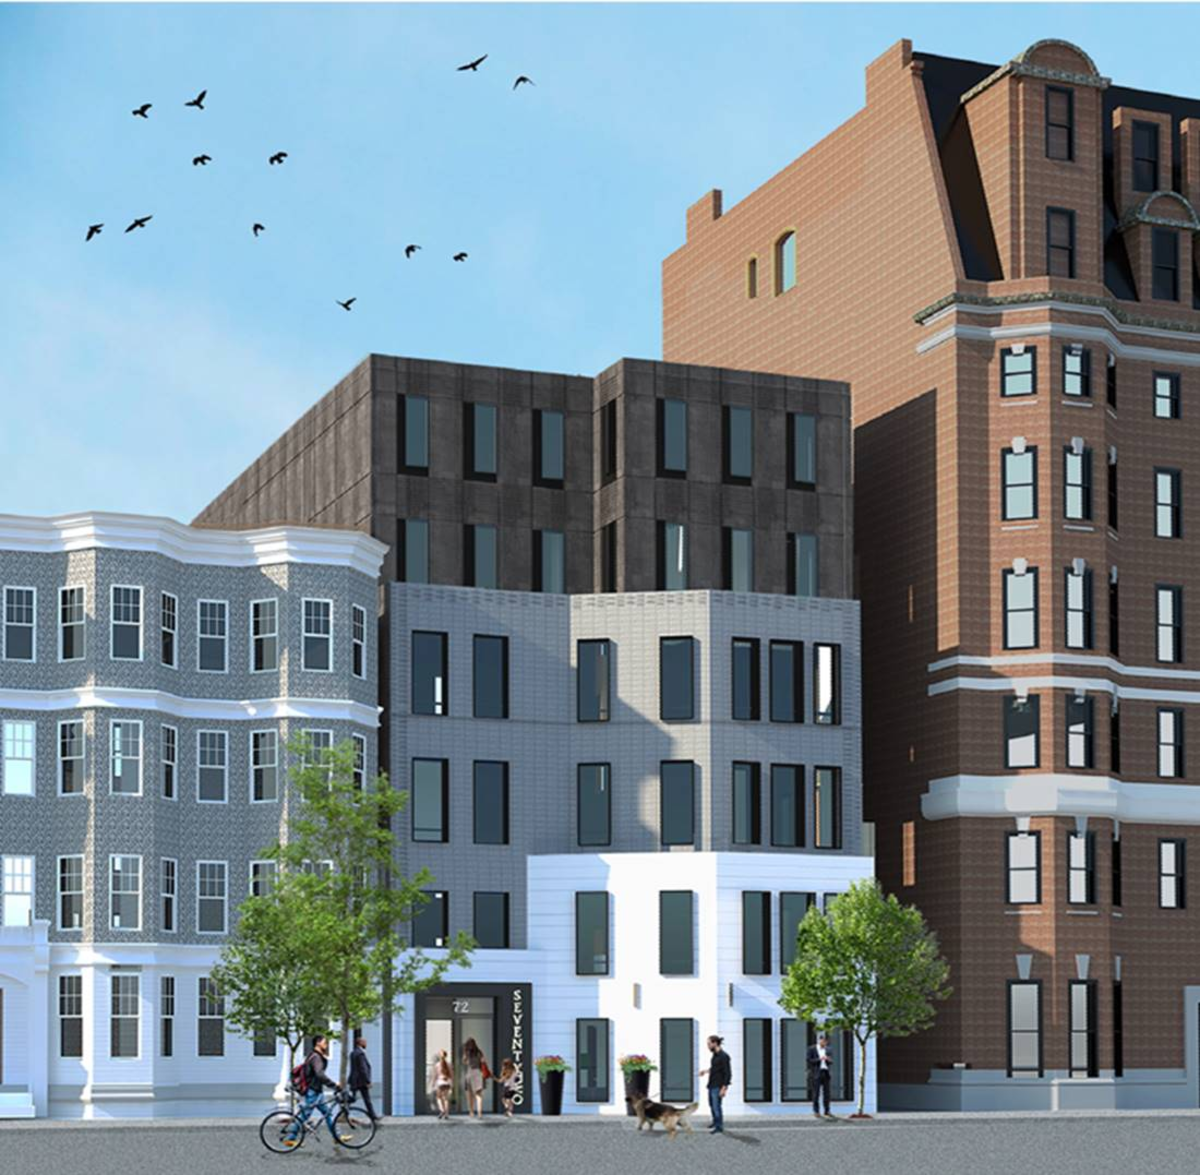 Rendering of the proposed apartment building at 72 Burbank St.